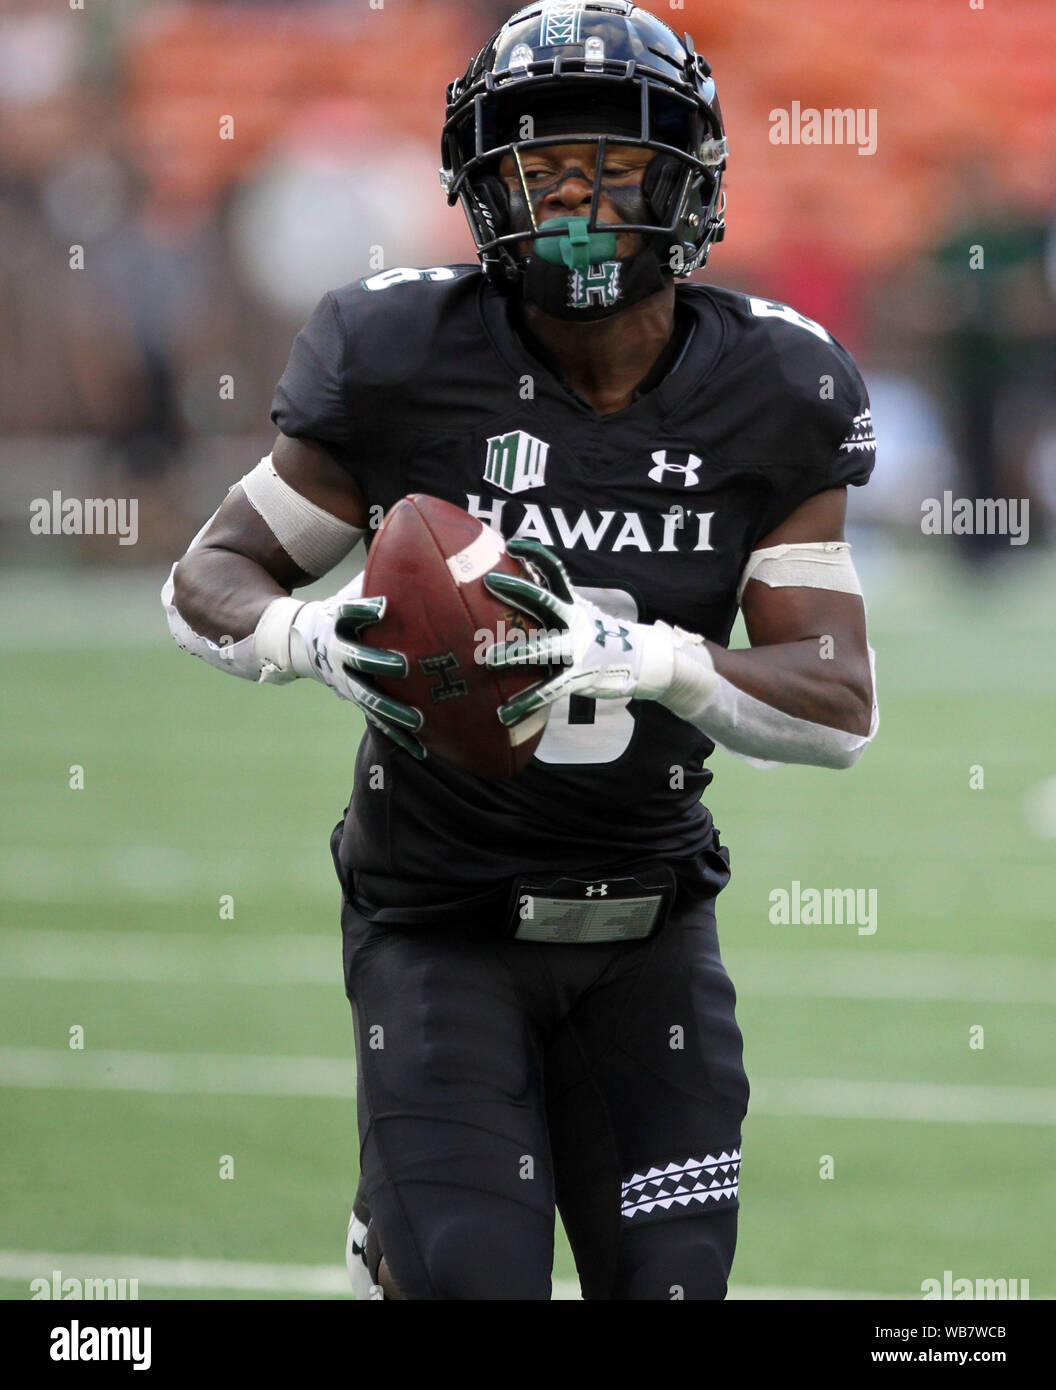 Honolulu, Hawaii, USA. 24th August, 2019. Basel, Switzerland. 25th Aug, 2019. AHawaii Rainbow Warriors wide receiver Cedric Byrd II #6 scores one of his four touchdowns on the evening during the game between the Hawaii Rainbow Warriors and the Arizona Wildcats at Aloha Stadium in Honolulu, HI - Michael Sullivan/CSM Credit: Cal Sport Media/Alamy Live News Credit: Cal Sport Media/Alamy Live News Credit: Cal Sport Media/Alamy Live News Credit: Cal Sport Media/Alamy Live News Stock Photo